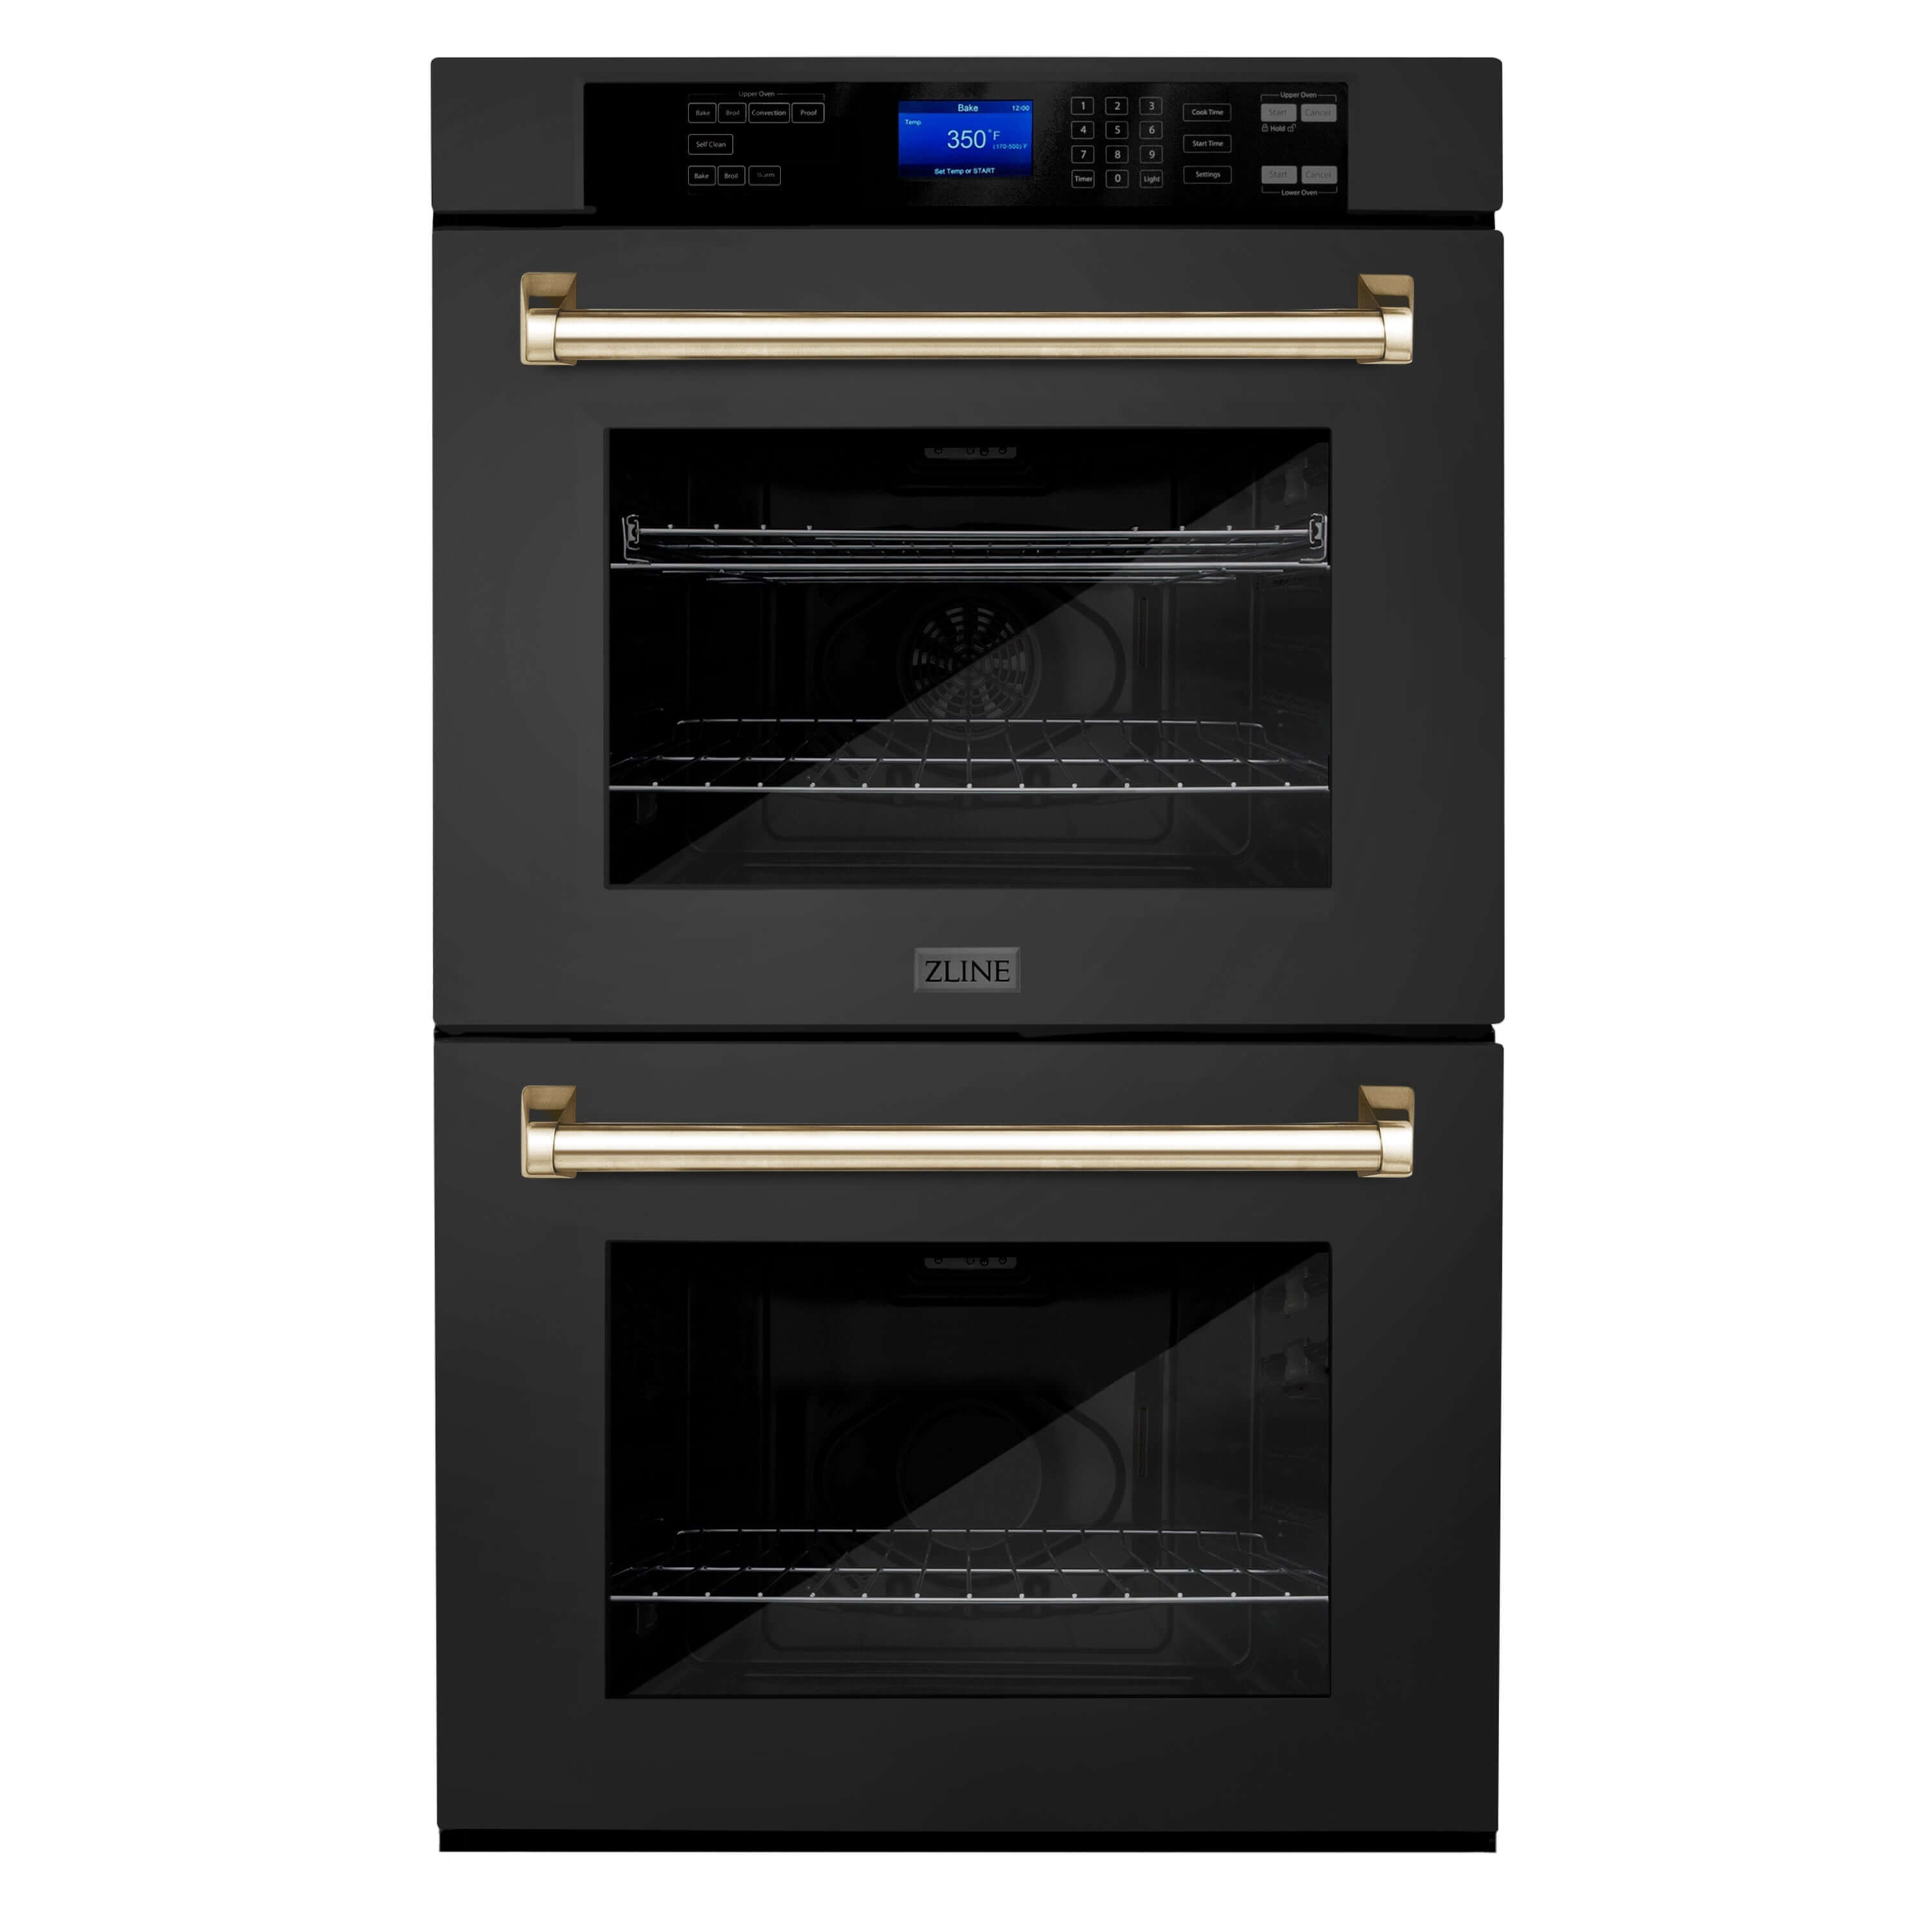 ZLINE Black Stainless Steel double wall oven front.